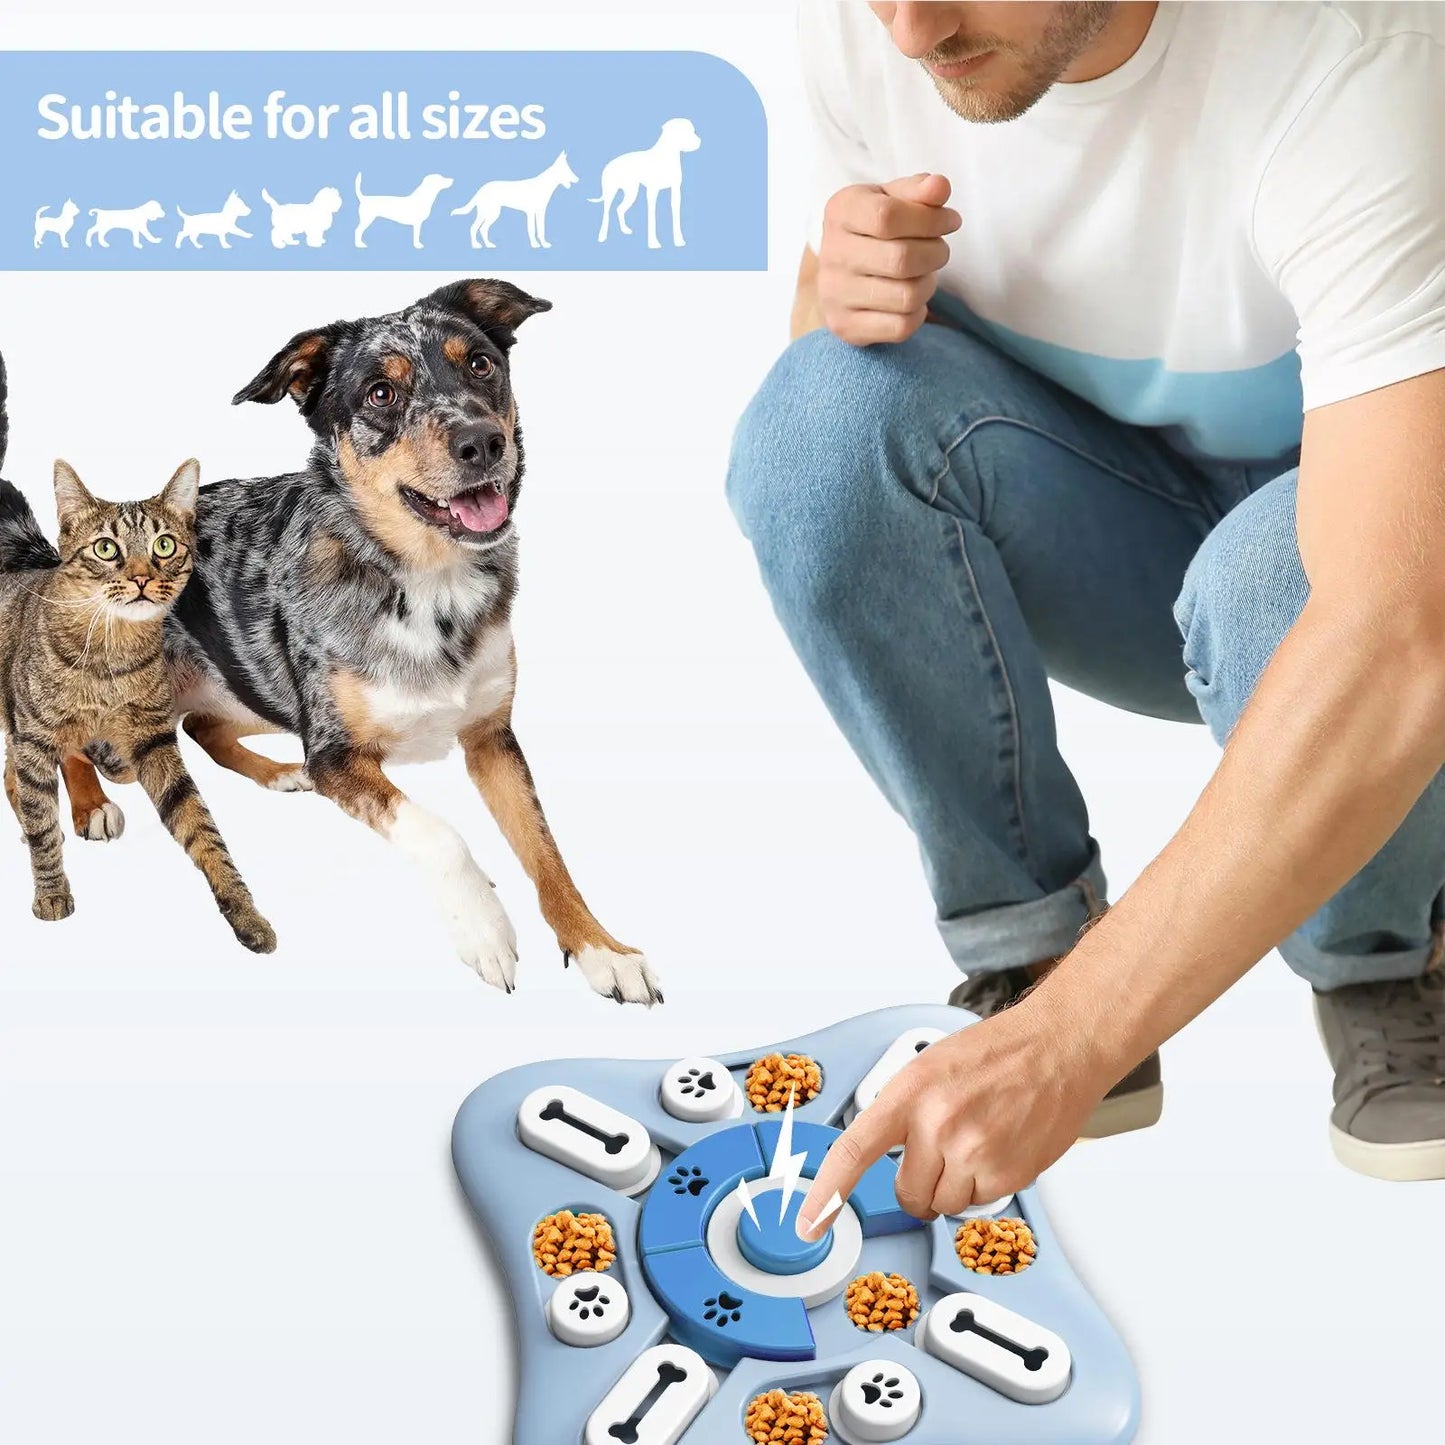 Dog Toy, Slow Feeder, Pet Puzzle Helps Increase IQ. NonSlip Bowl